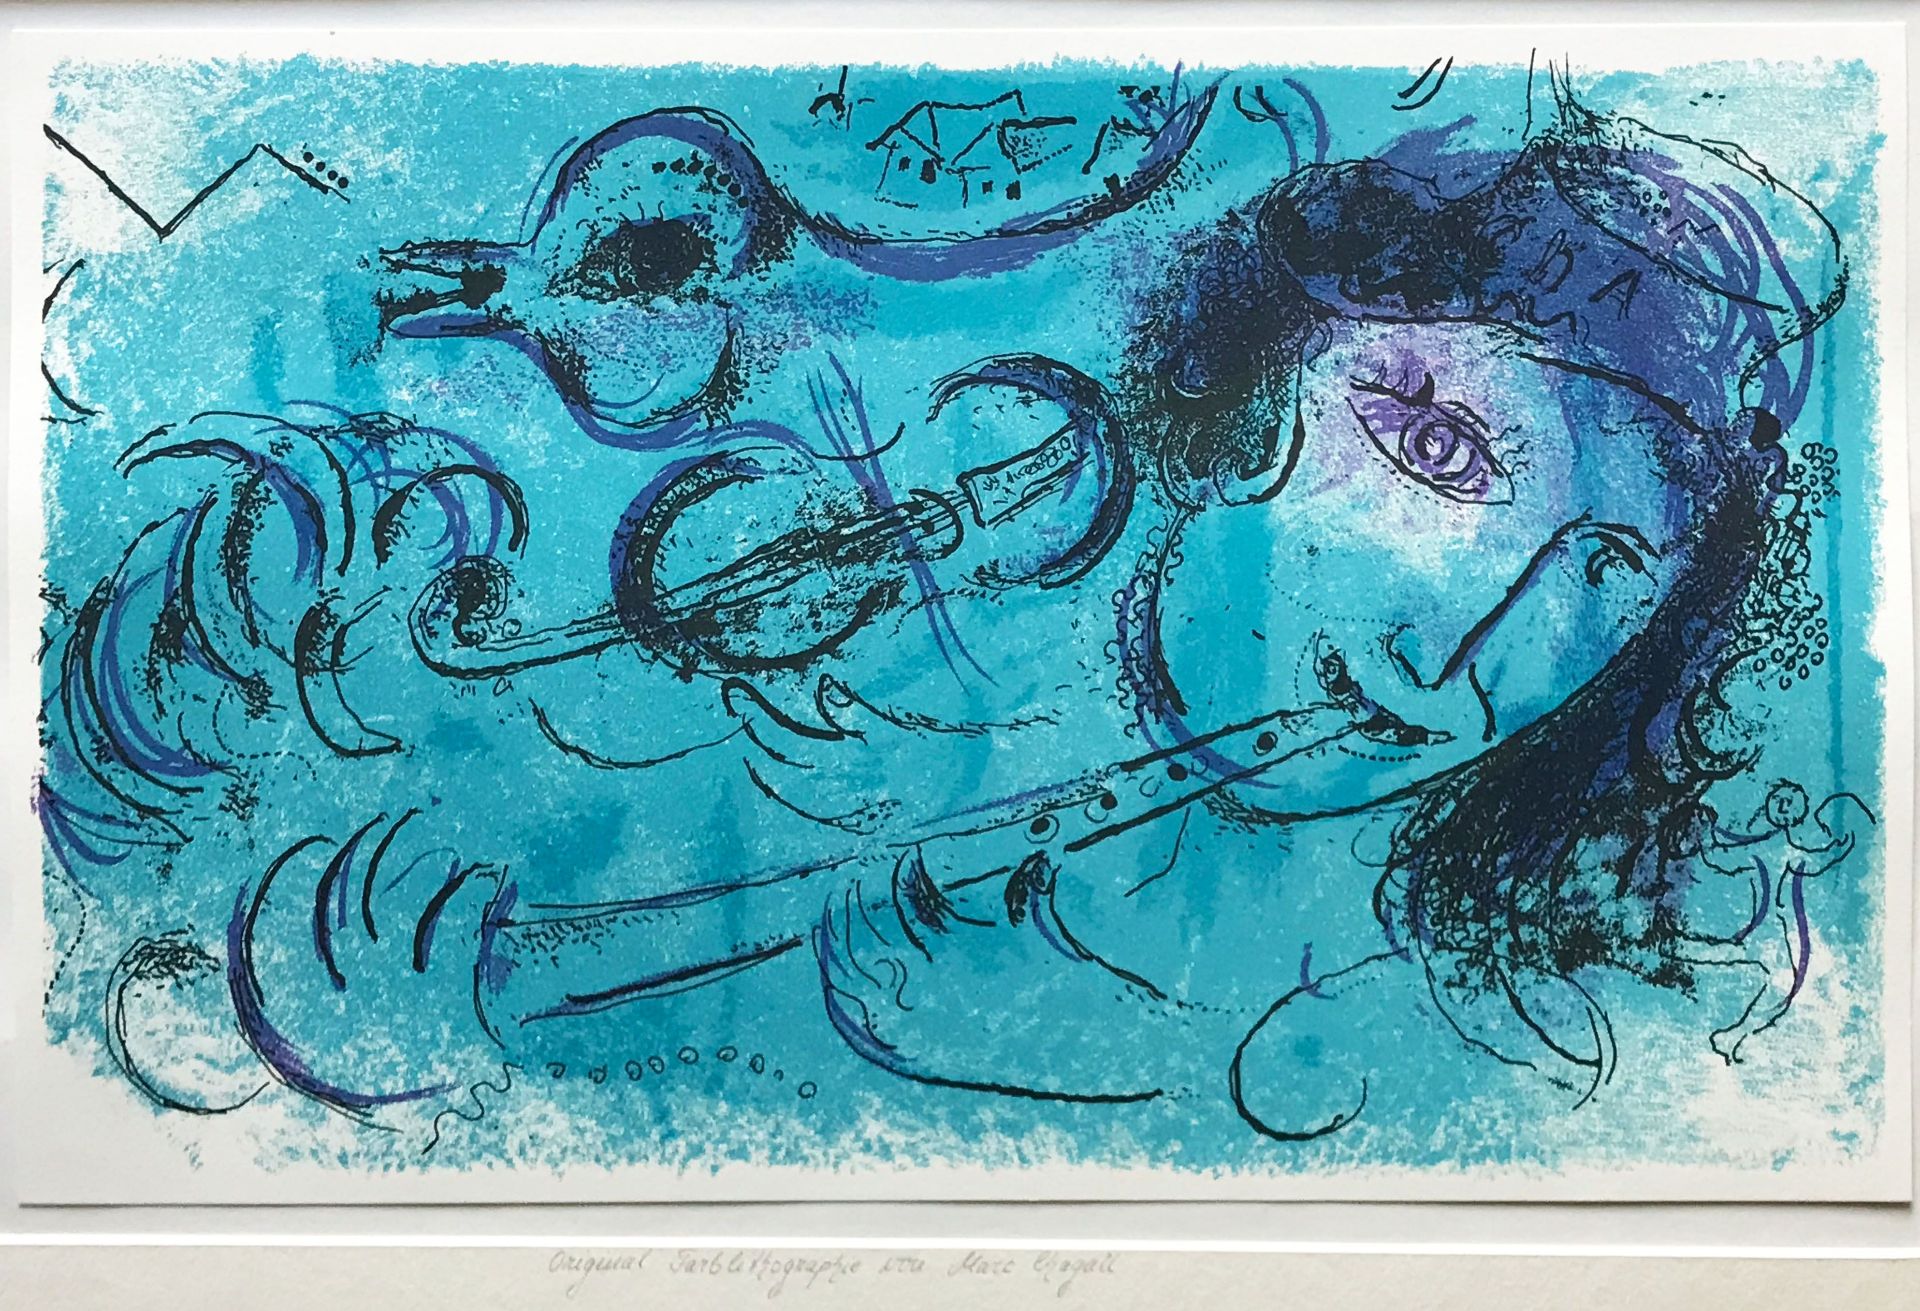 Marc Chagall (1887 Witebsk  1985 St-Paul-de-Vence), Die blaue Flöte: Auf einer Flöte spielende Frau